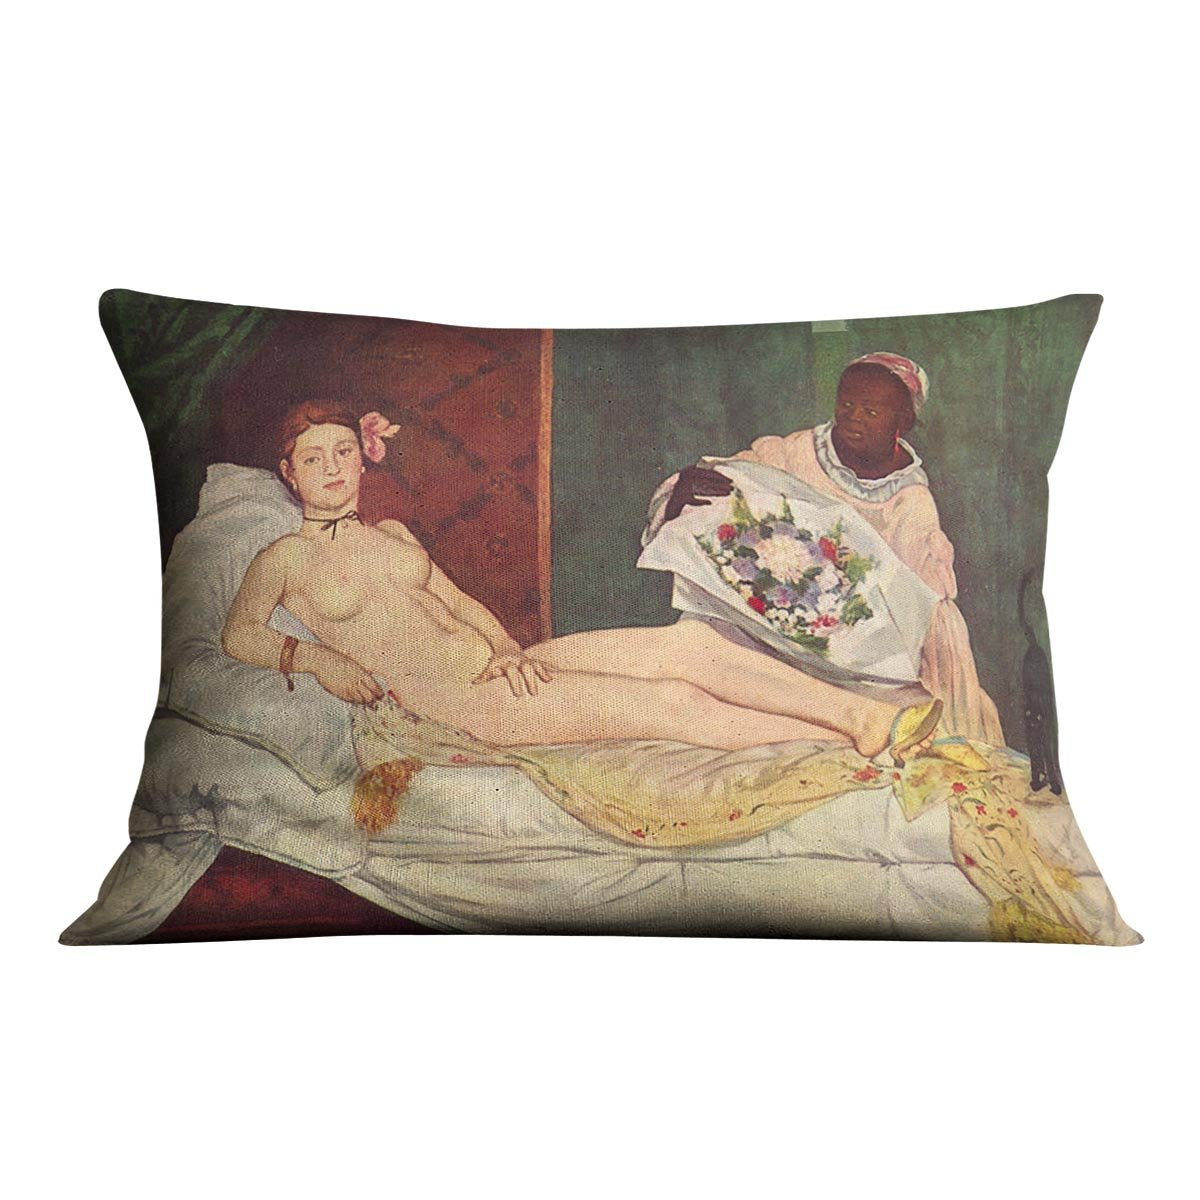 Olympia 1 by Manet Throw Pillow